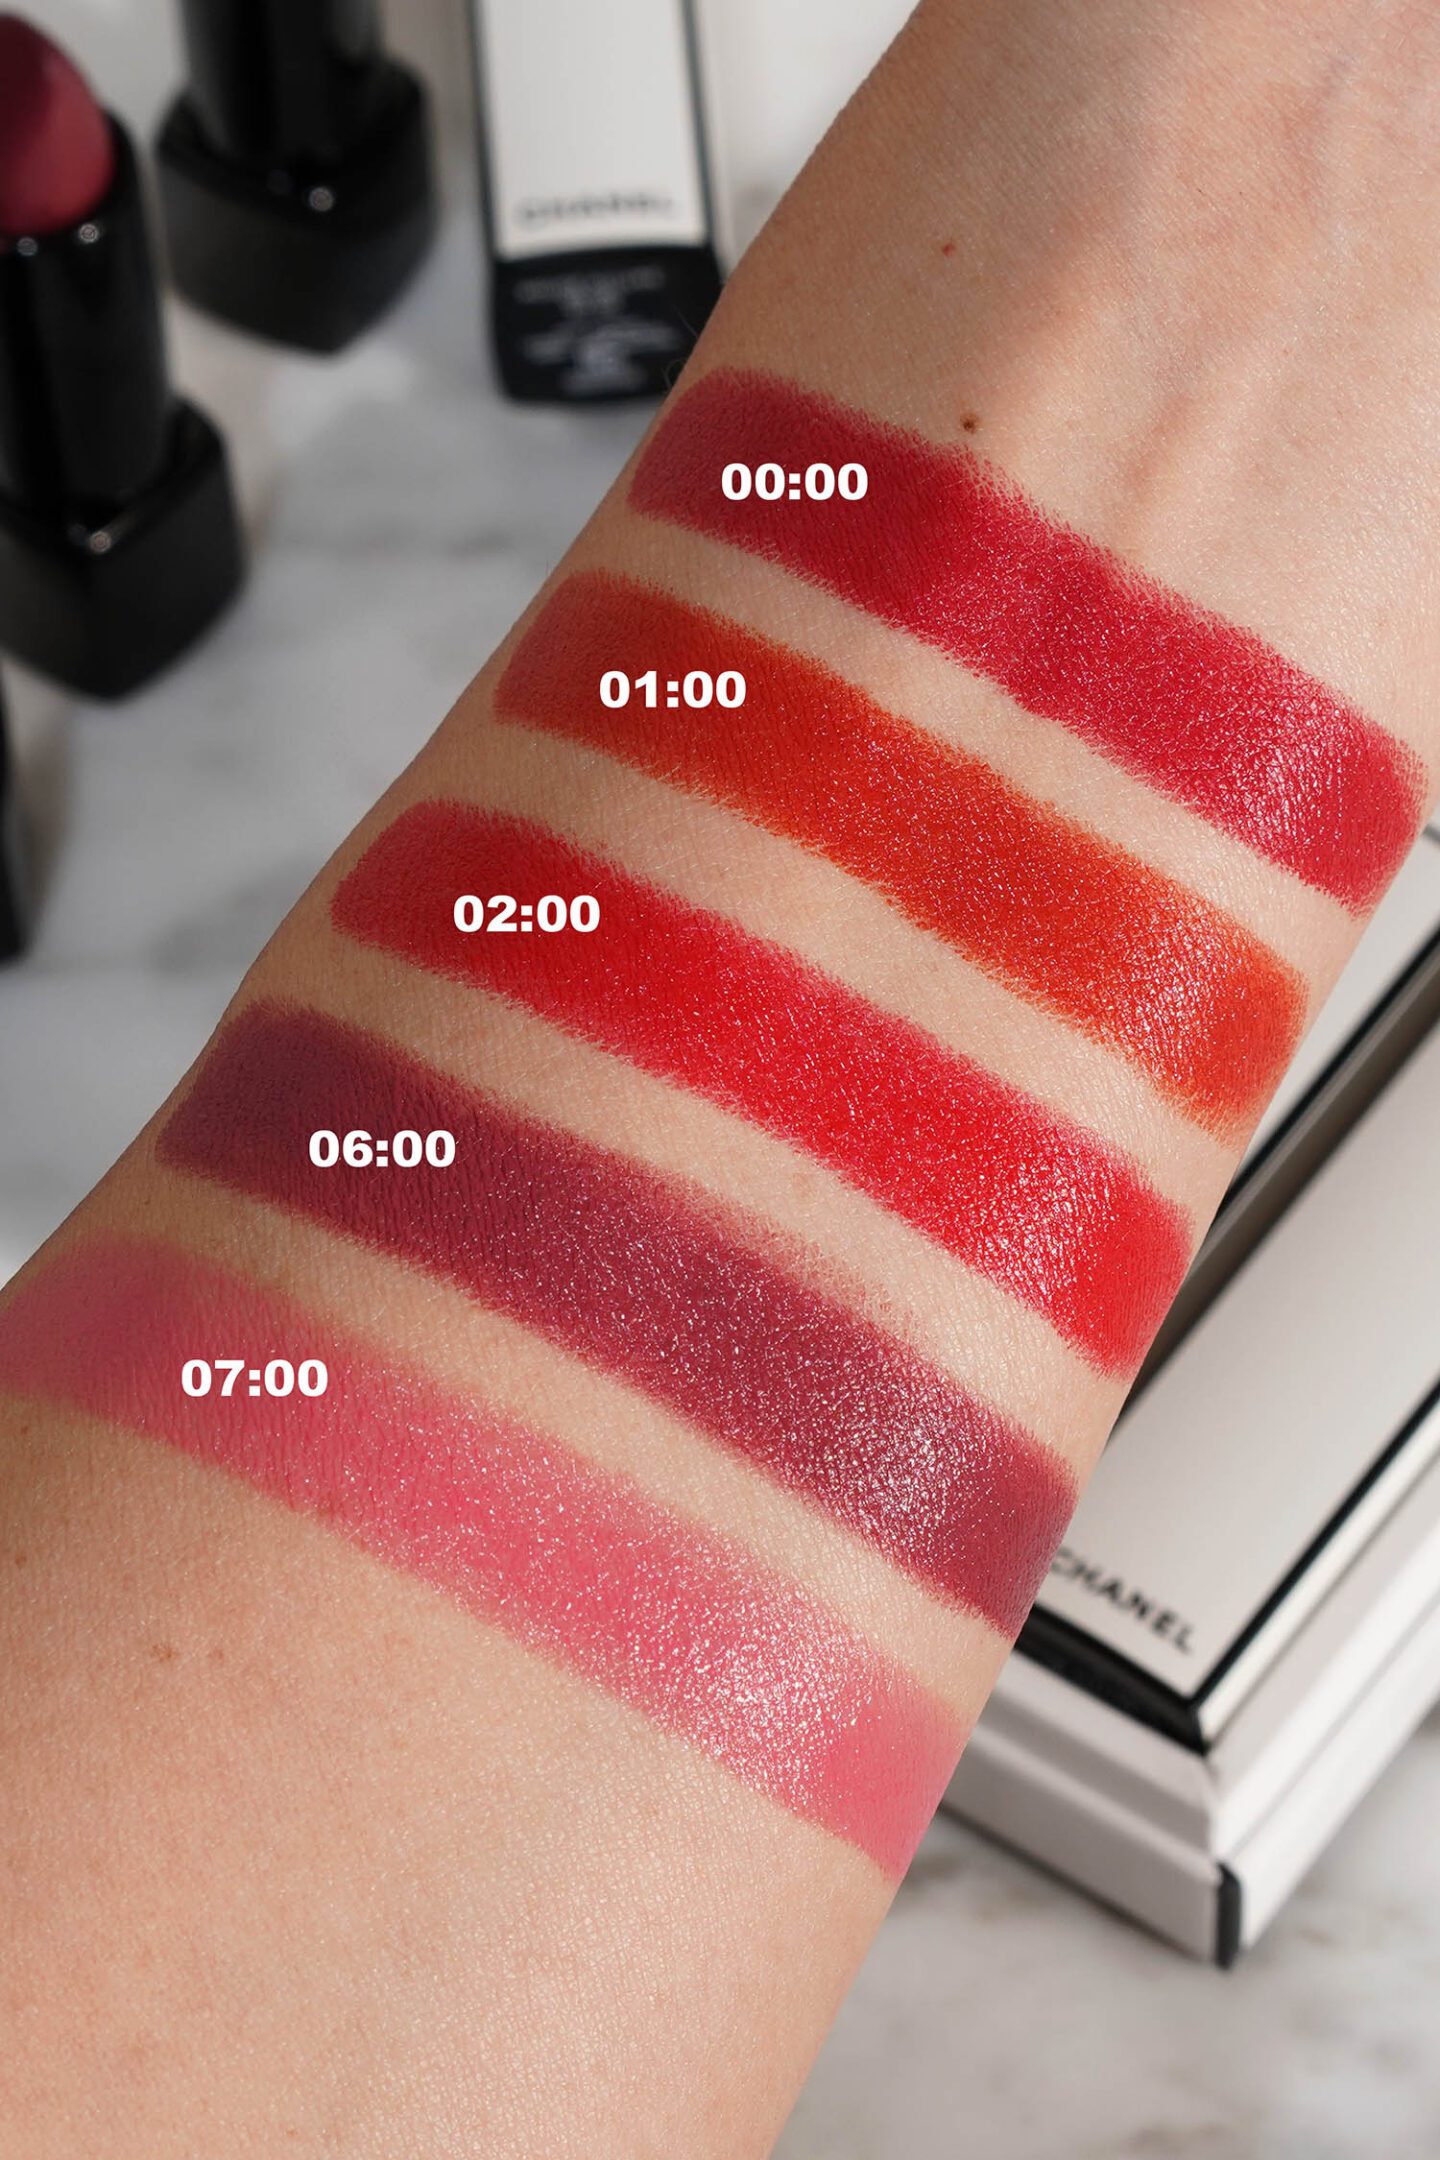 Chanel Rouge Allure Velvet Nuit Blanche swatches